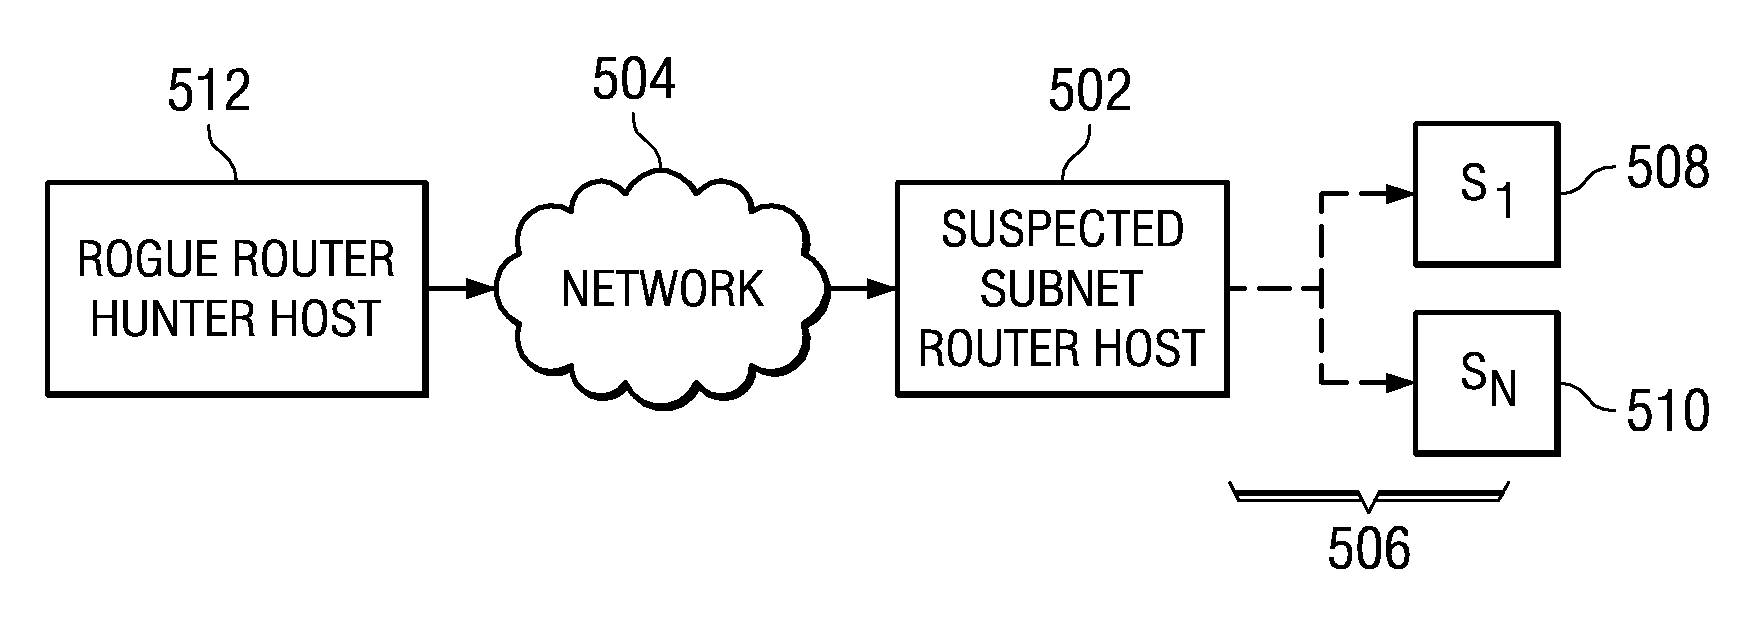 Rogue router hunter